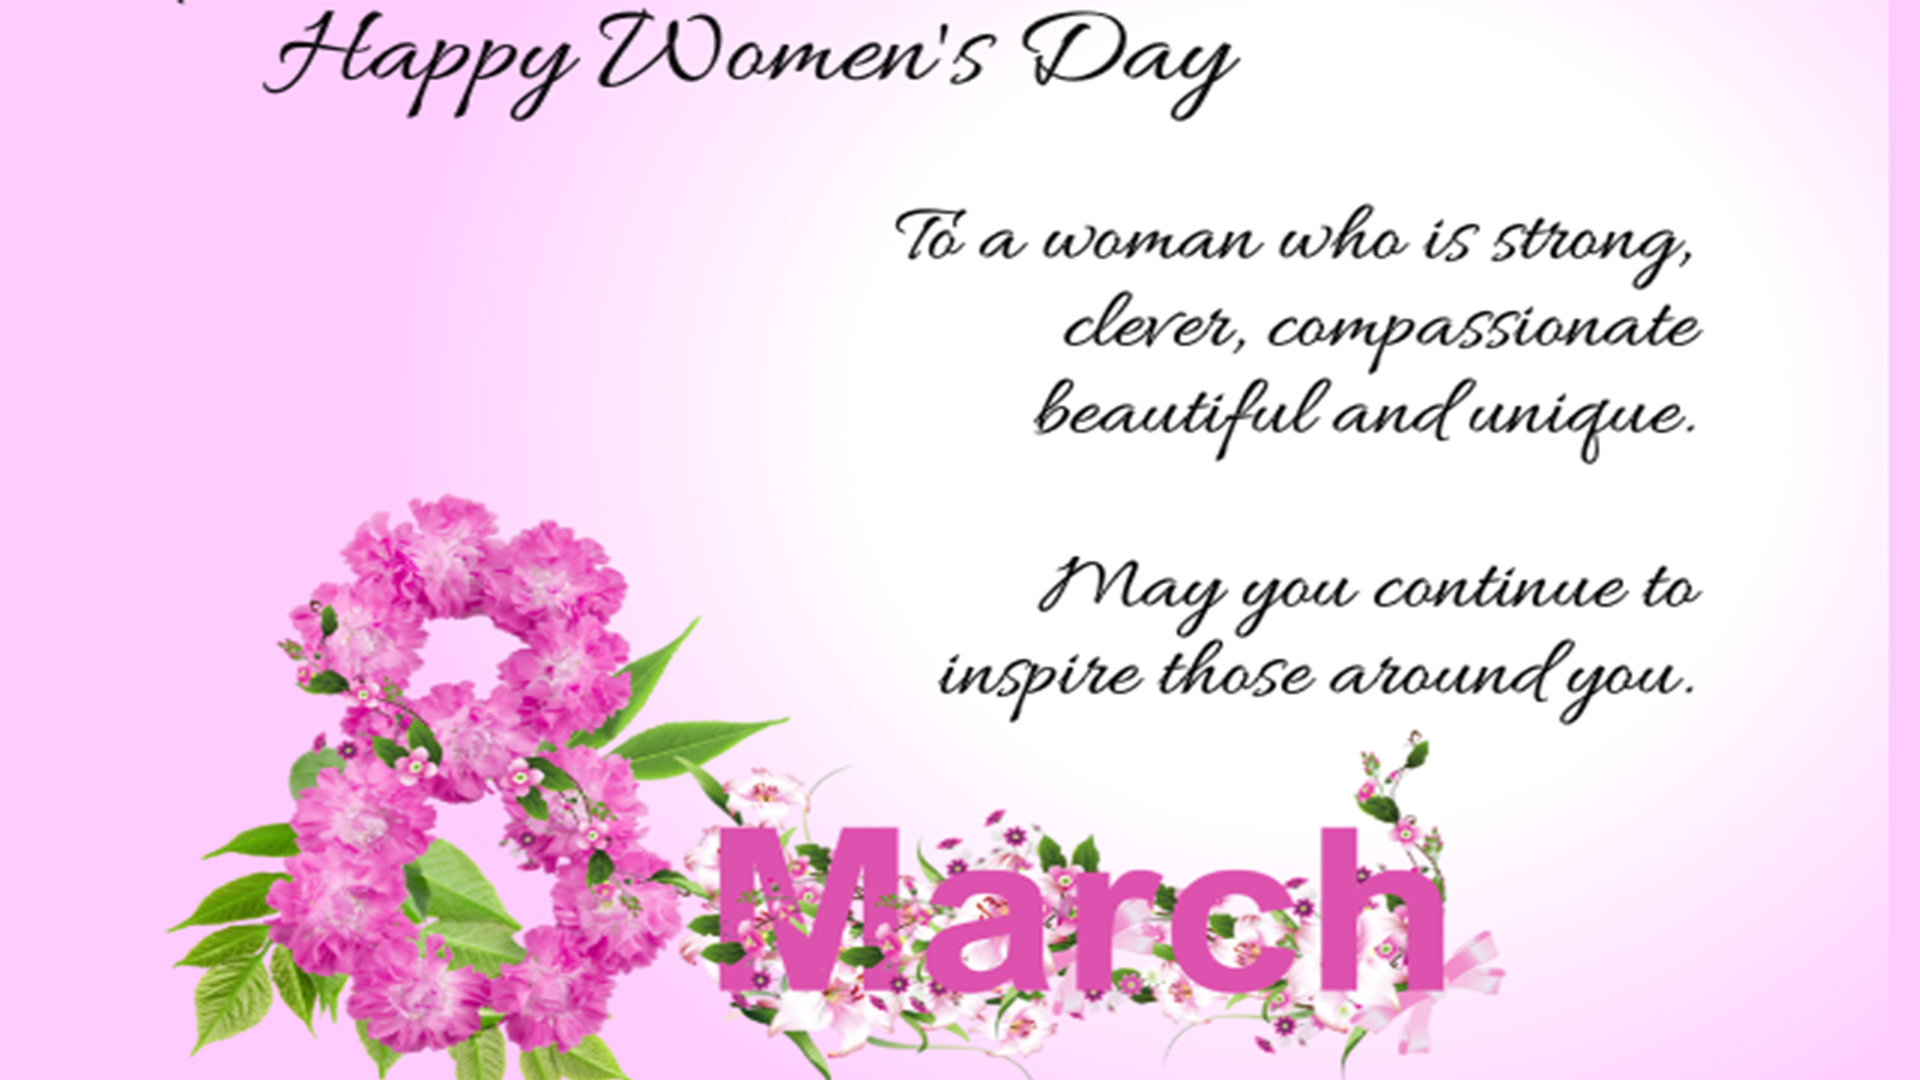 womens day image 2019